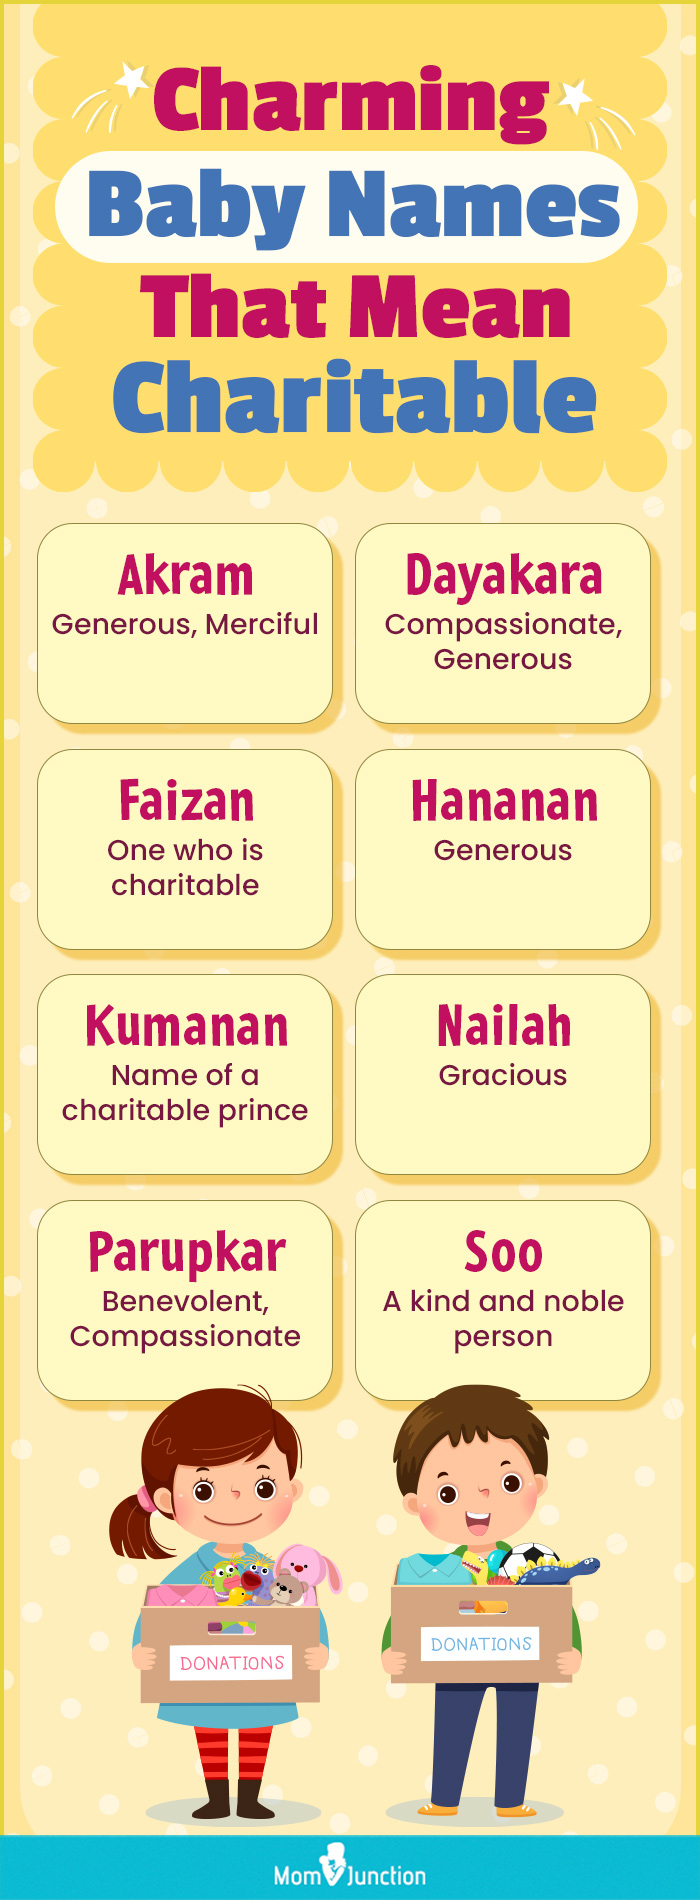 Charming Baby Names That Mean Charitable (infographic)